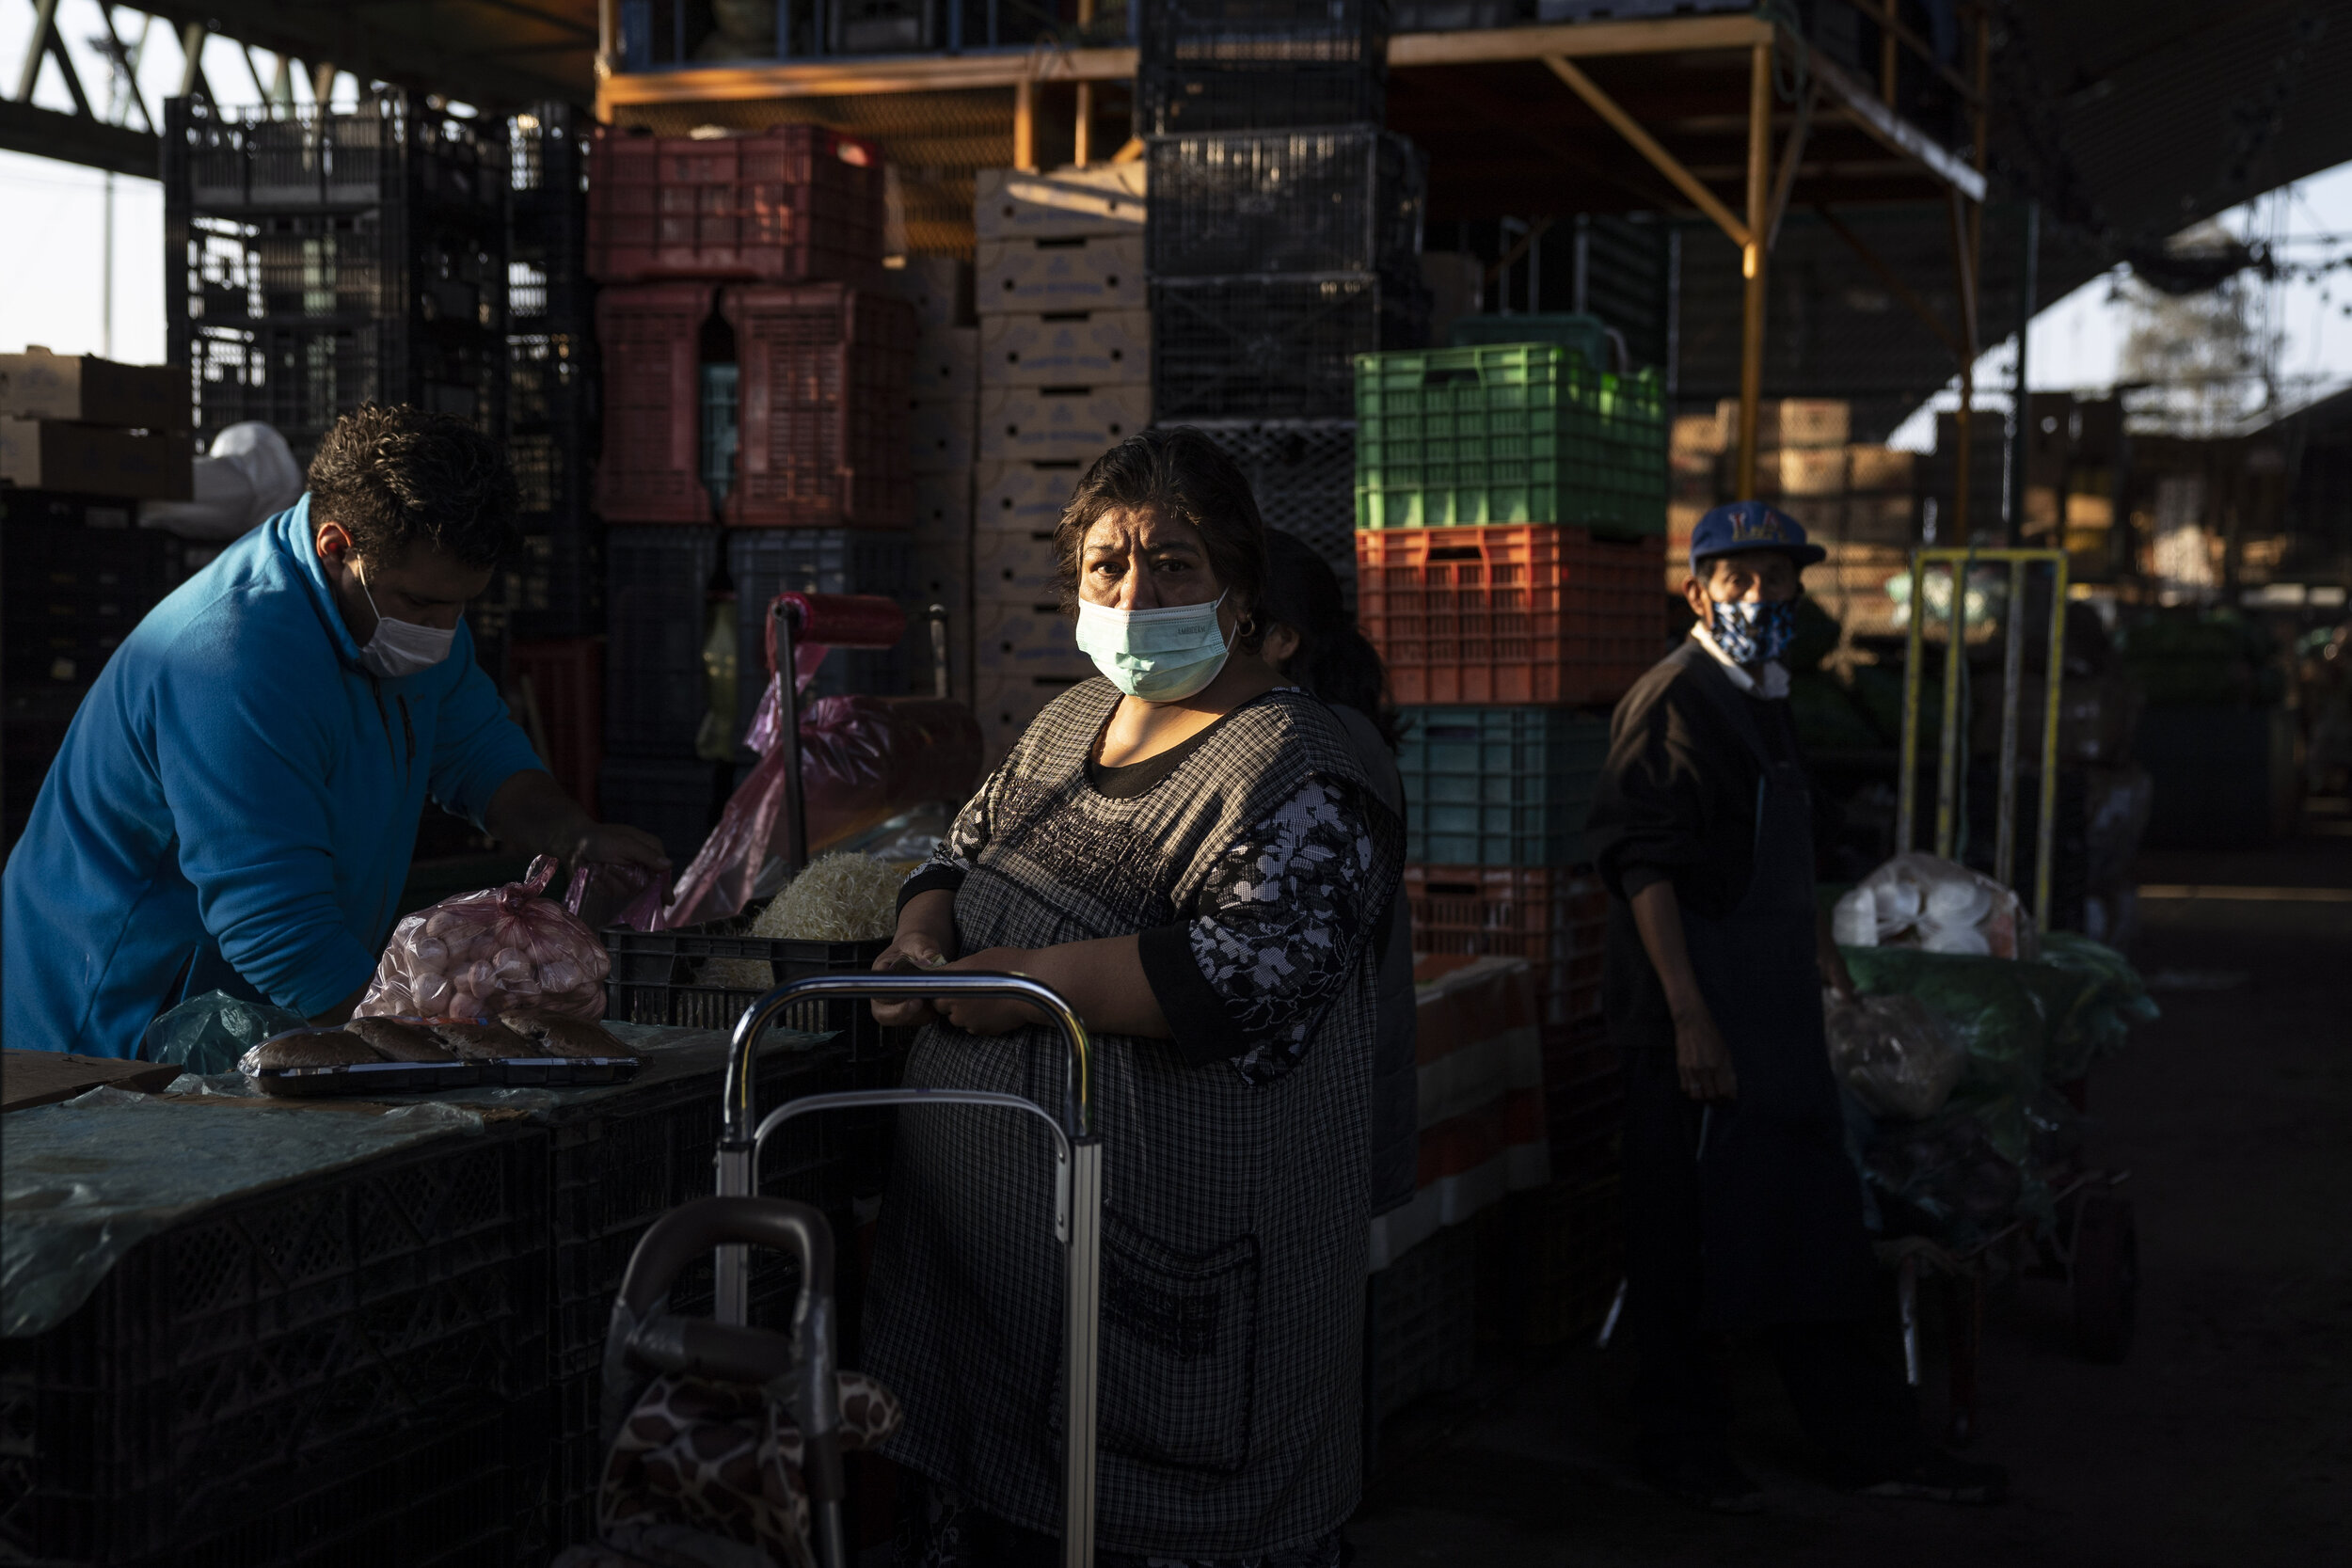    A woman looks on in the Central de Abasto market, Mexico City.  